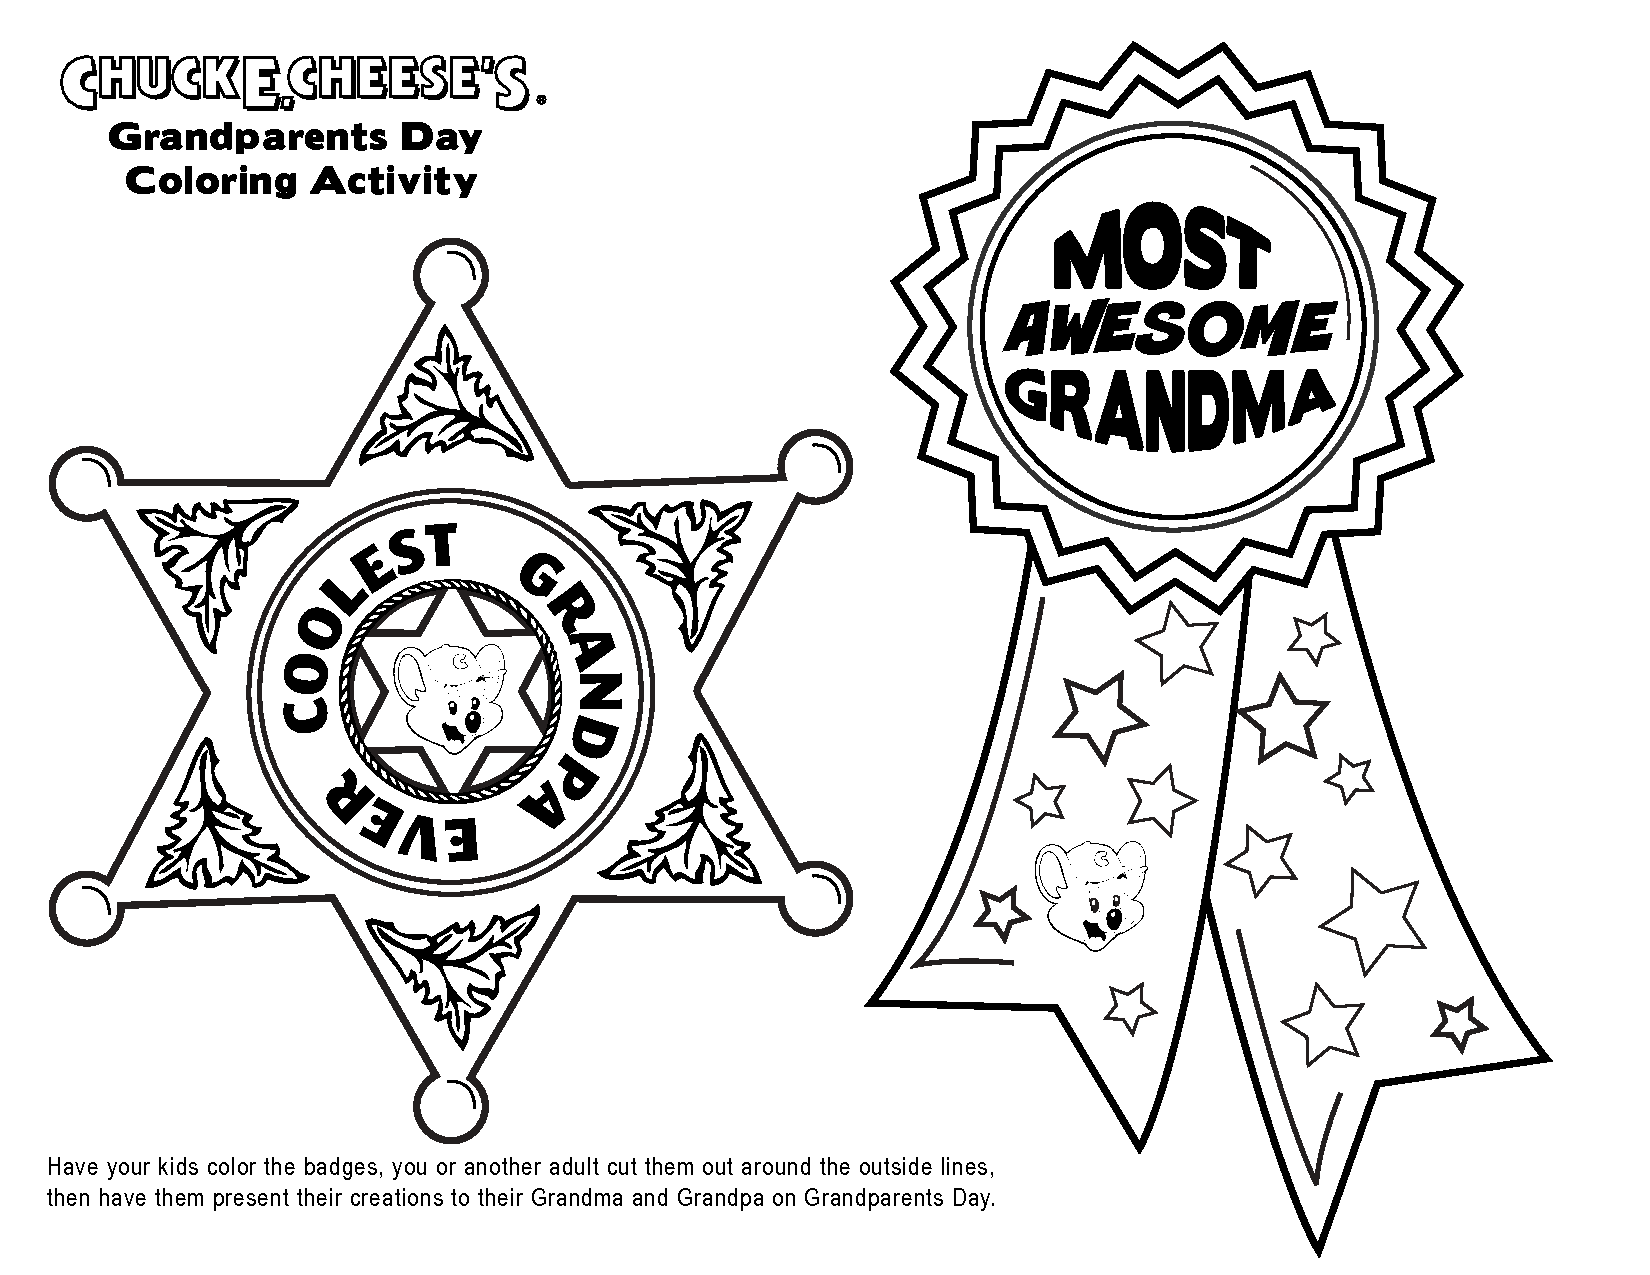 Grandparents Day Coloring Pages To Print And Color. Grandparents